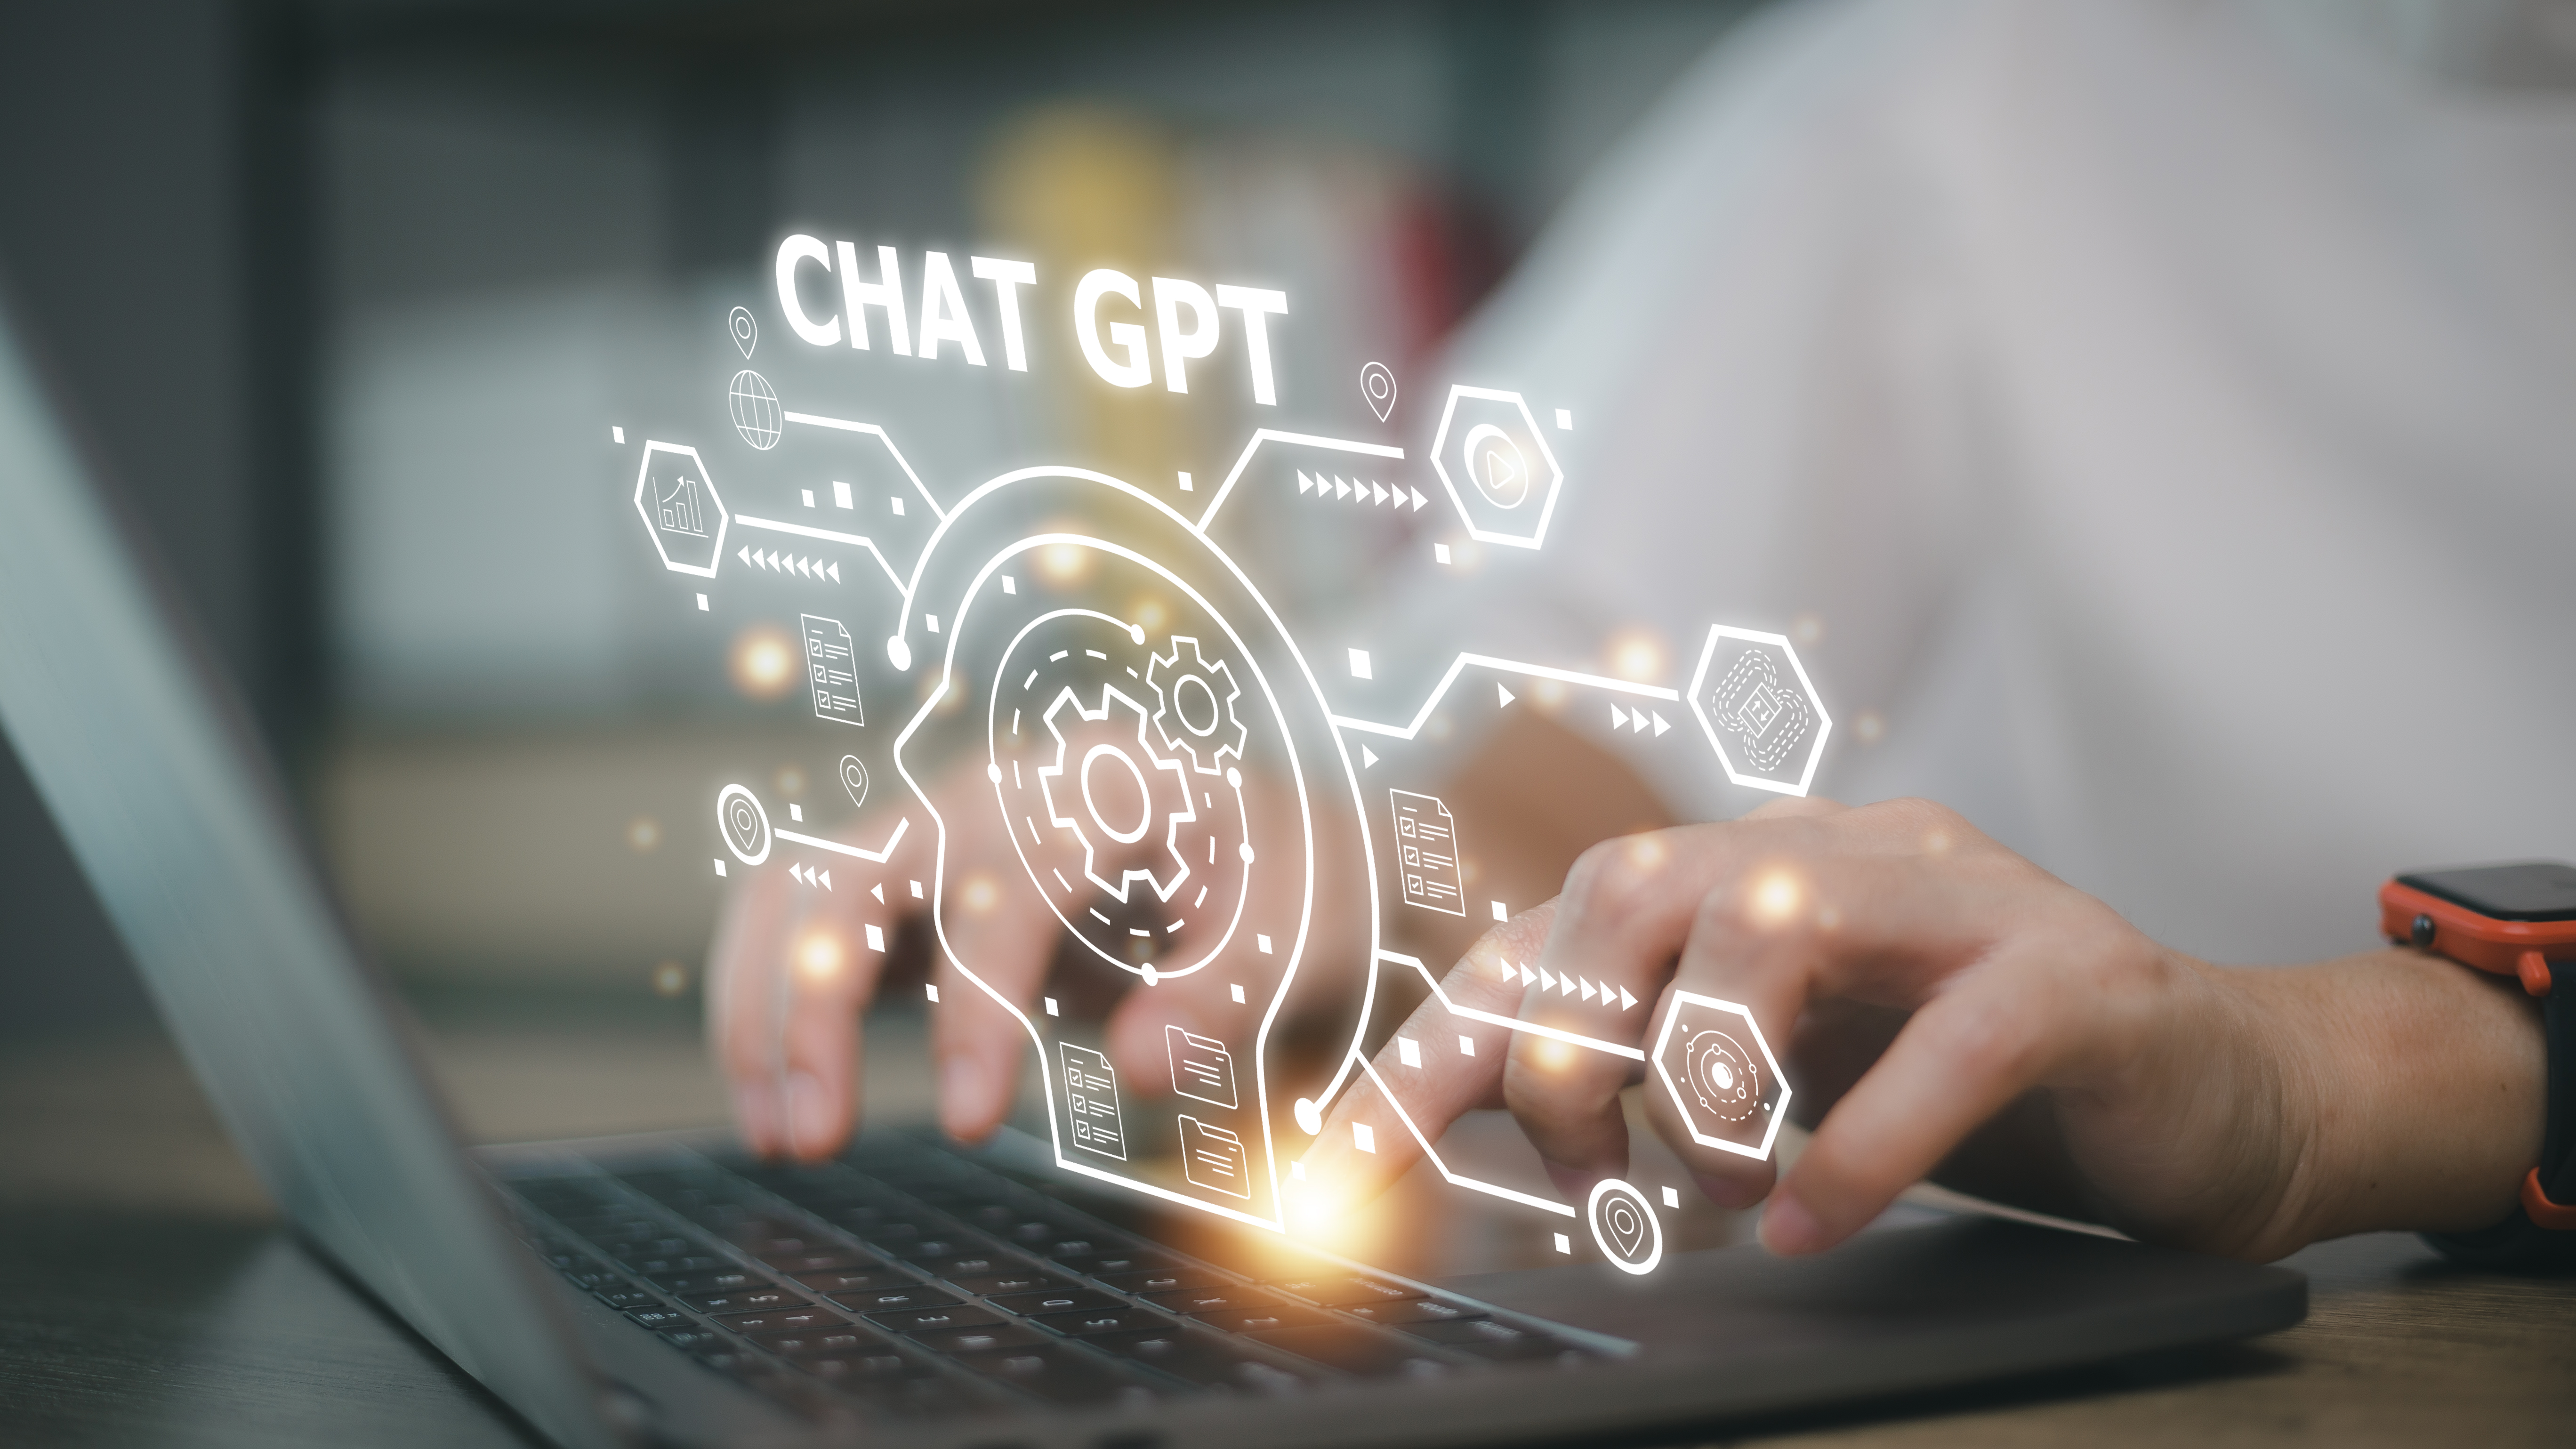 What is ChatGPT and how can it be leveraged in marketing?